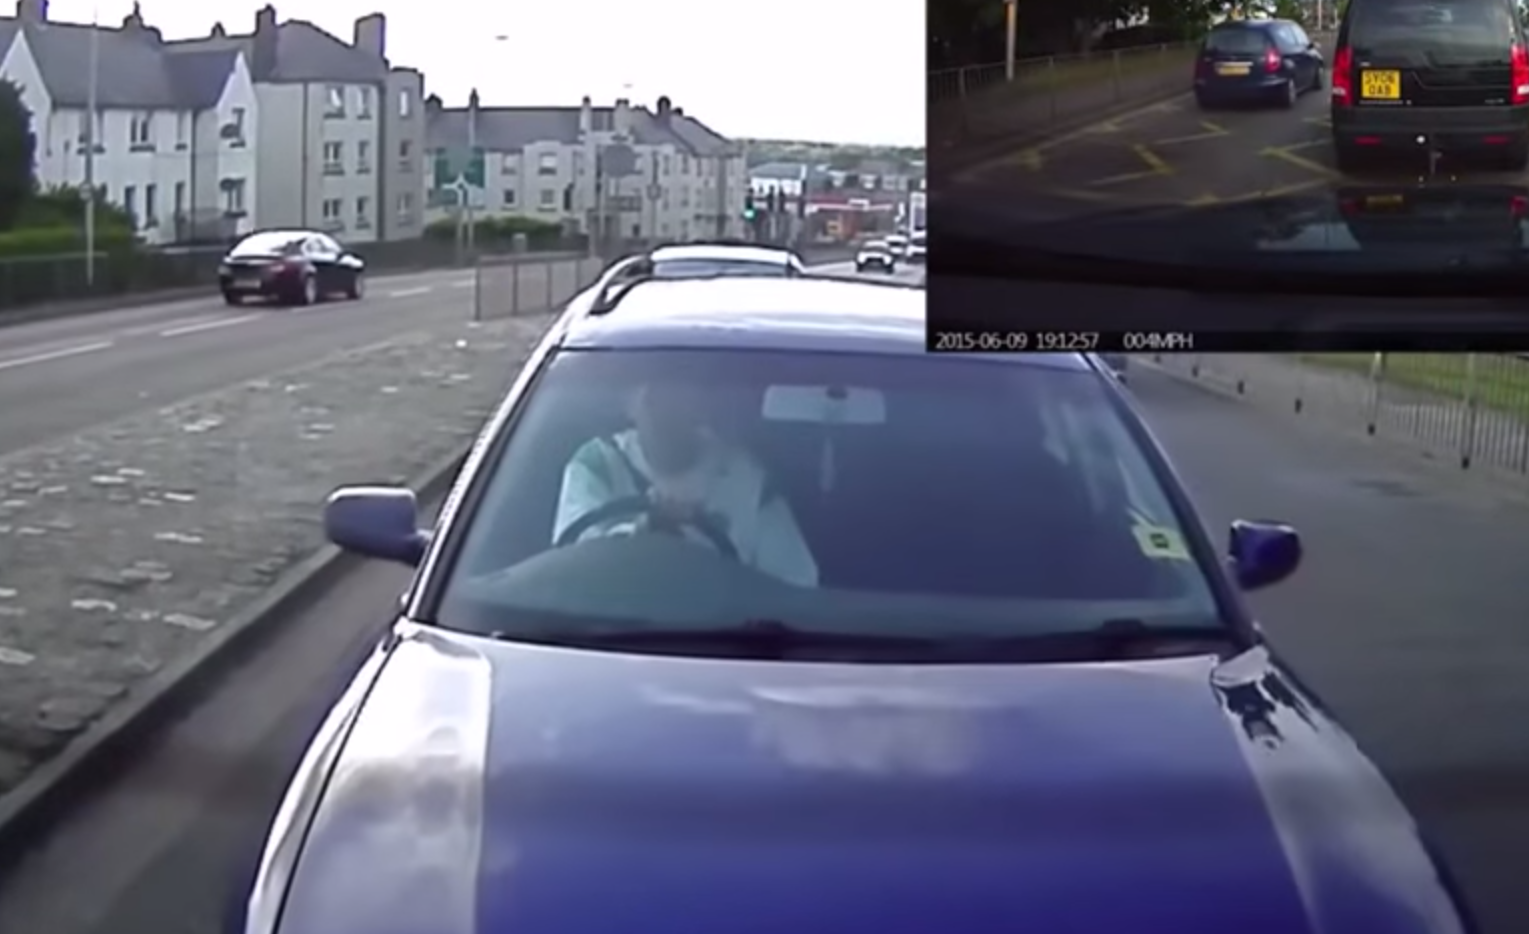 The moment the driver appears to shunt into the back of the car front